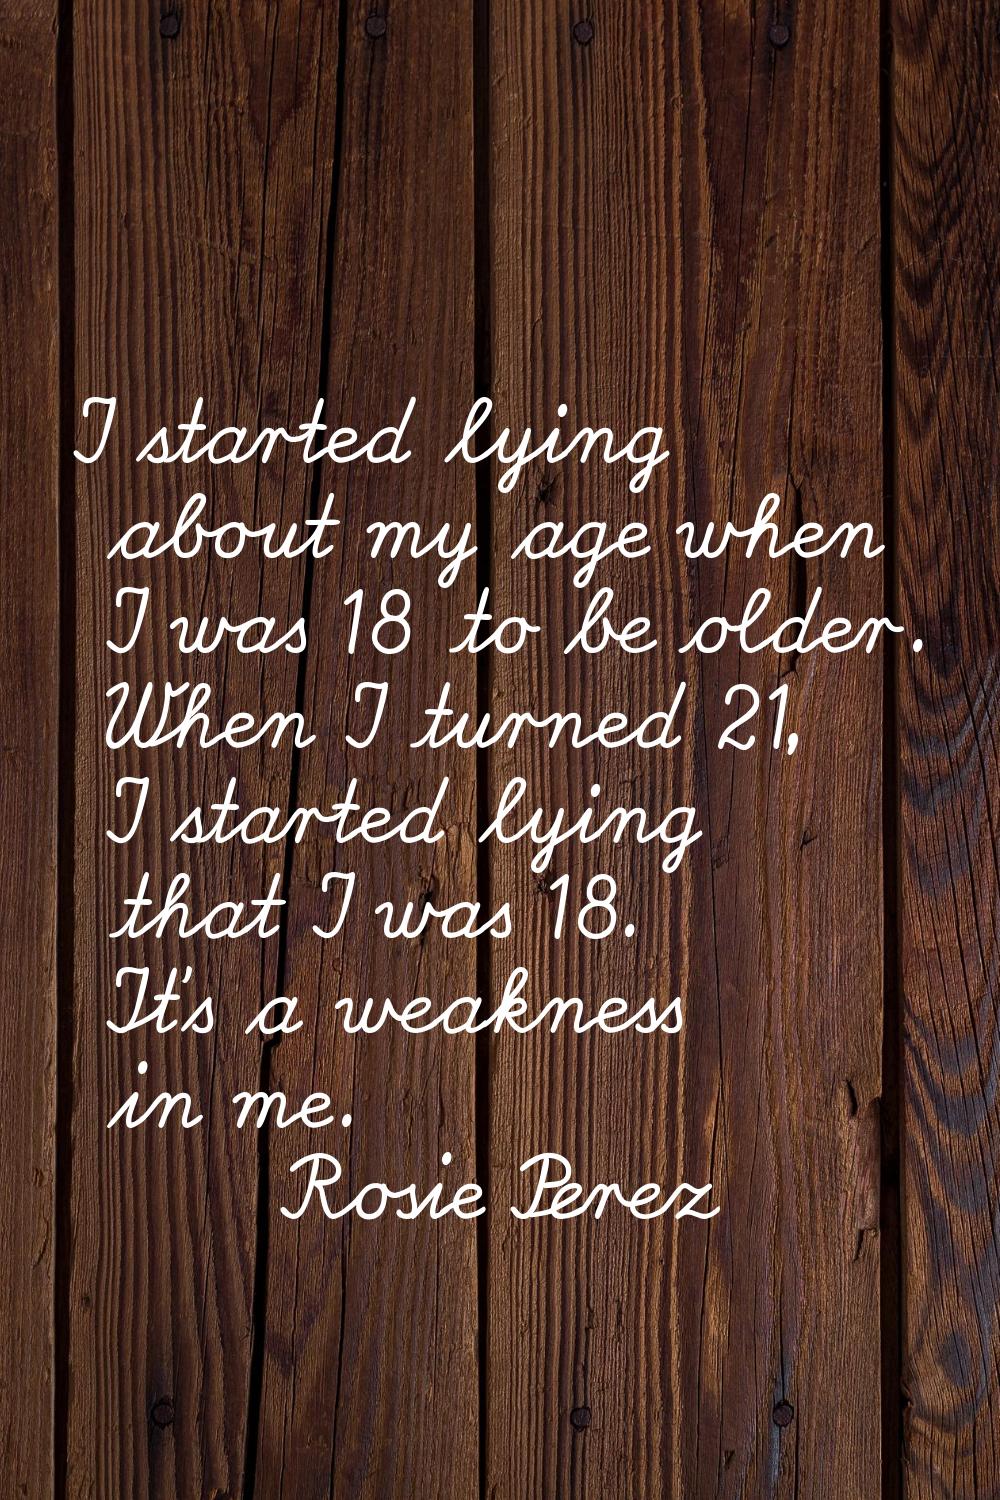 I started lying about my age when I was 18 to be older. When I turned 21, I started lying that I wa